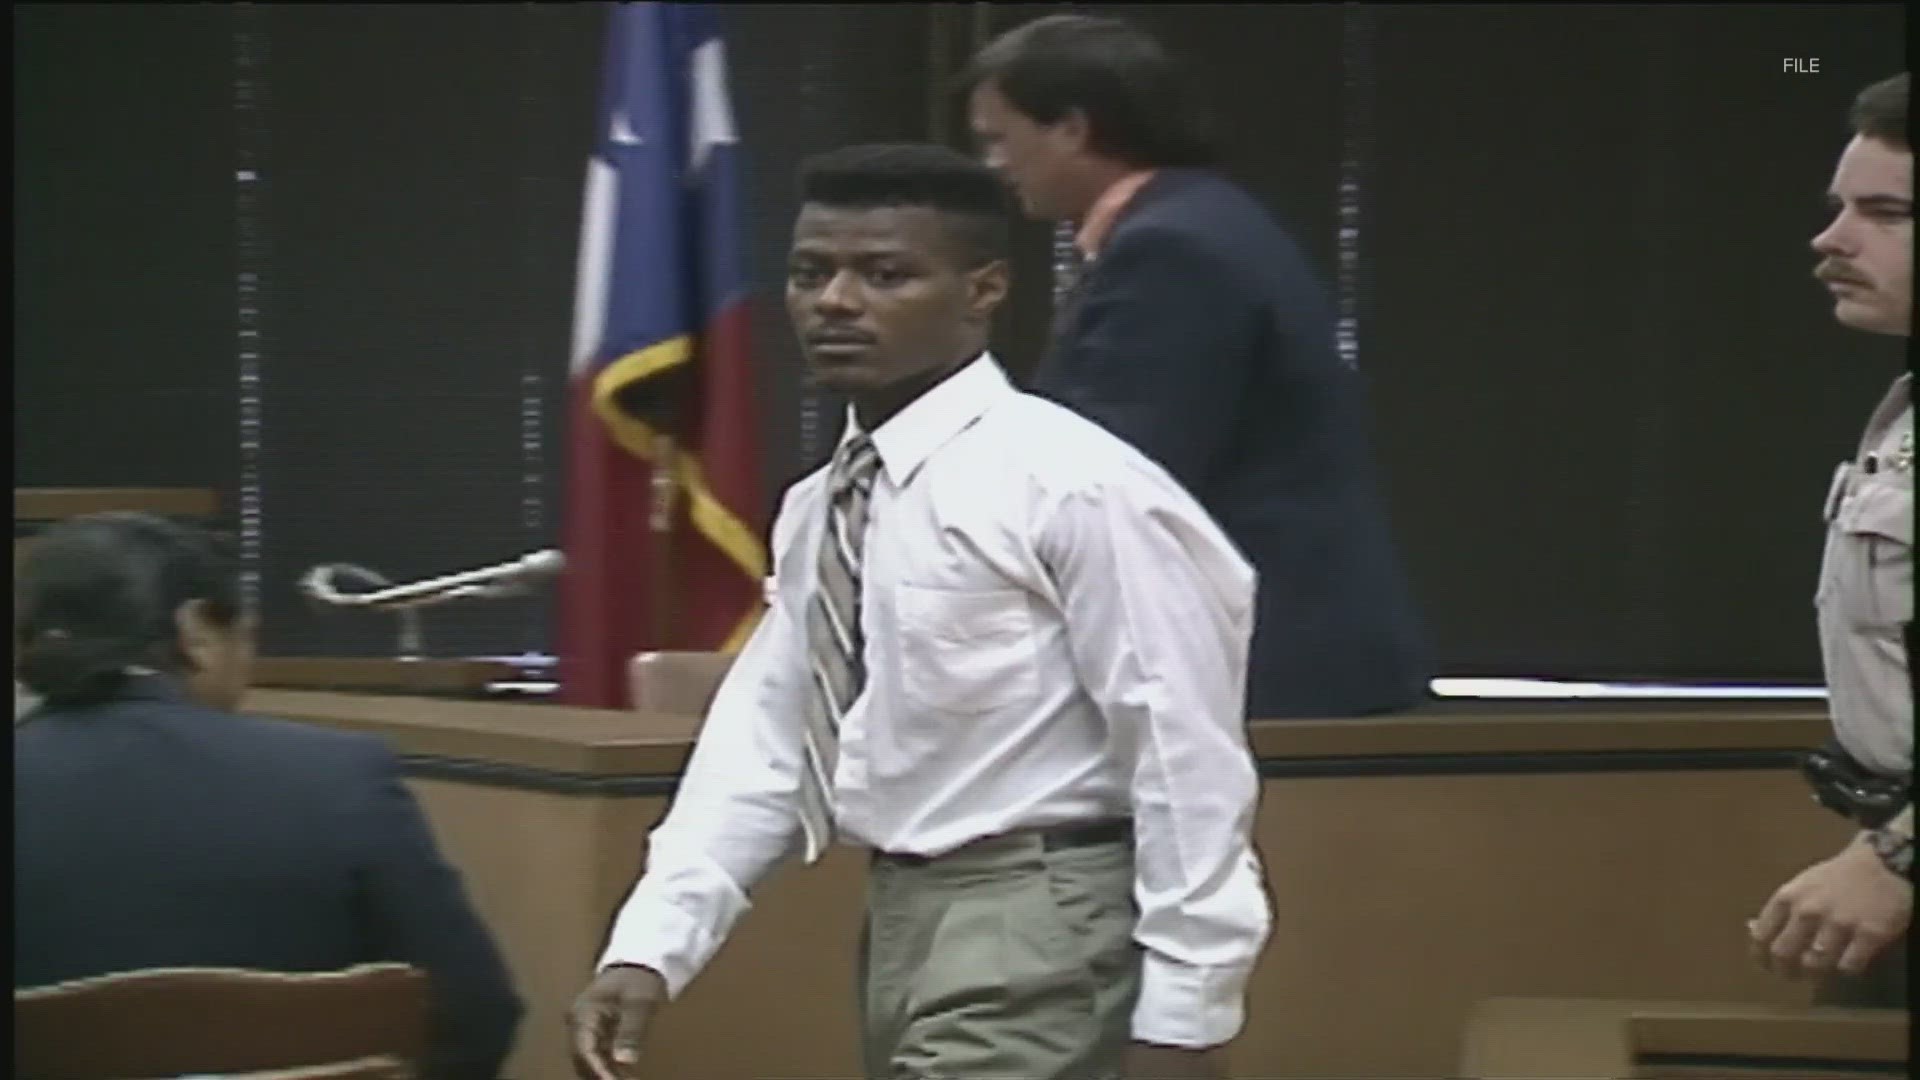 Causey was convicted of murdering Anita Byington of Austin in 1991.